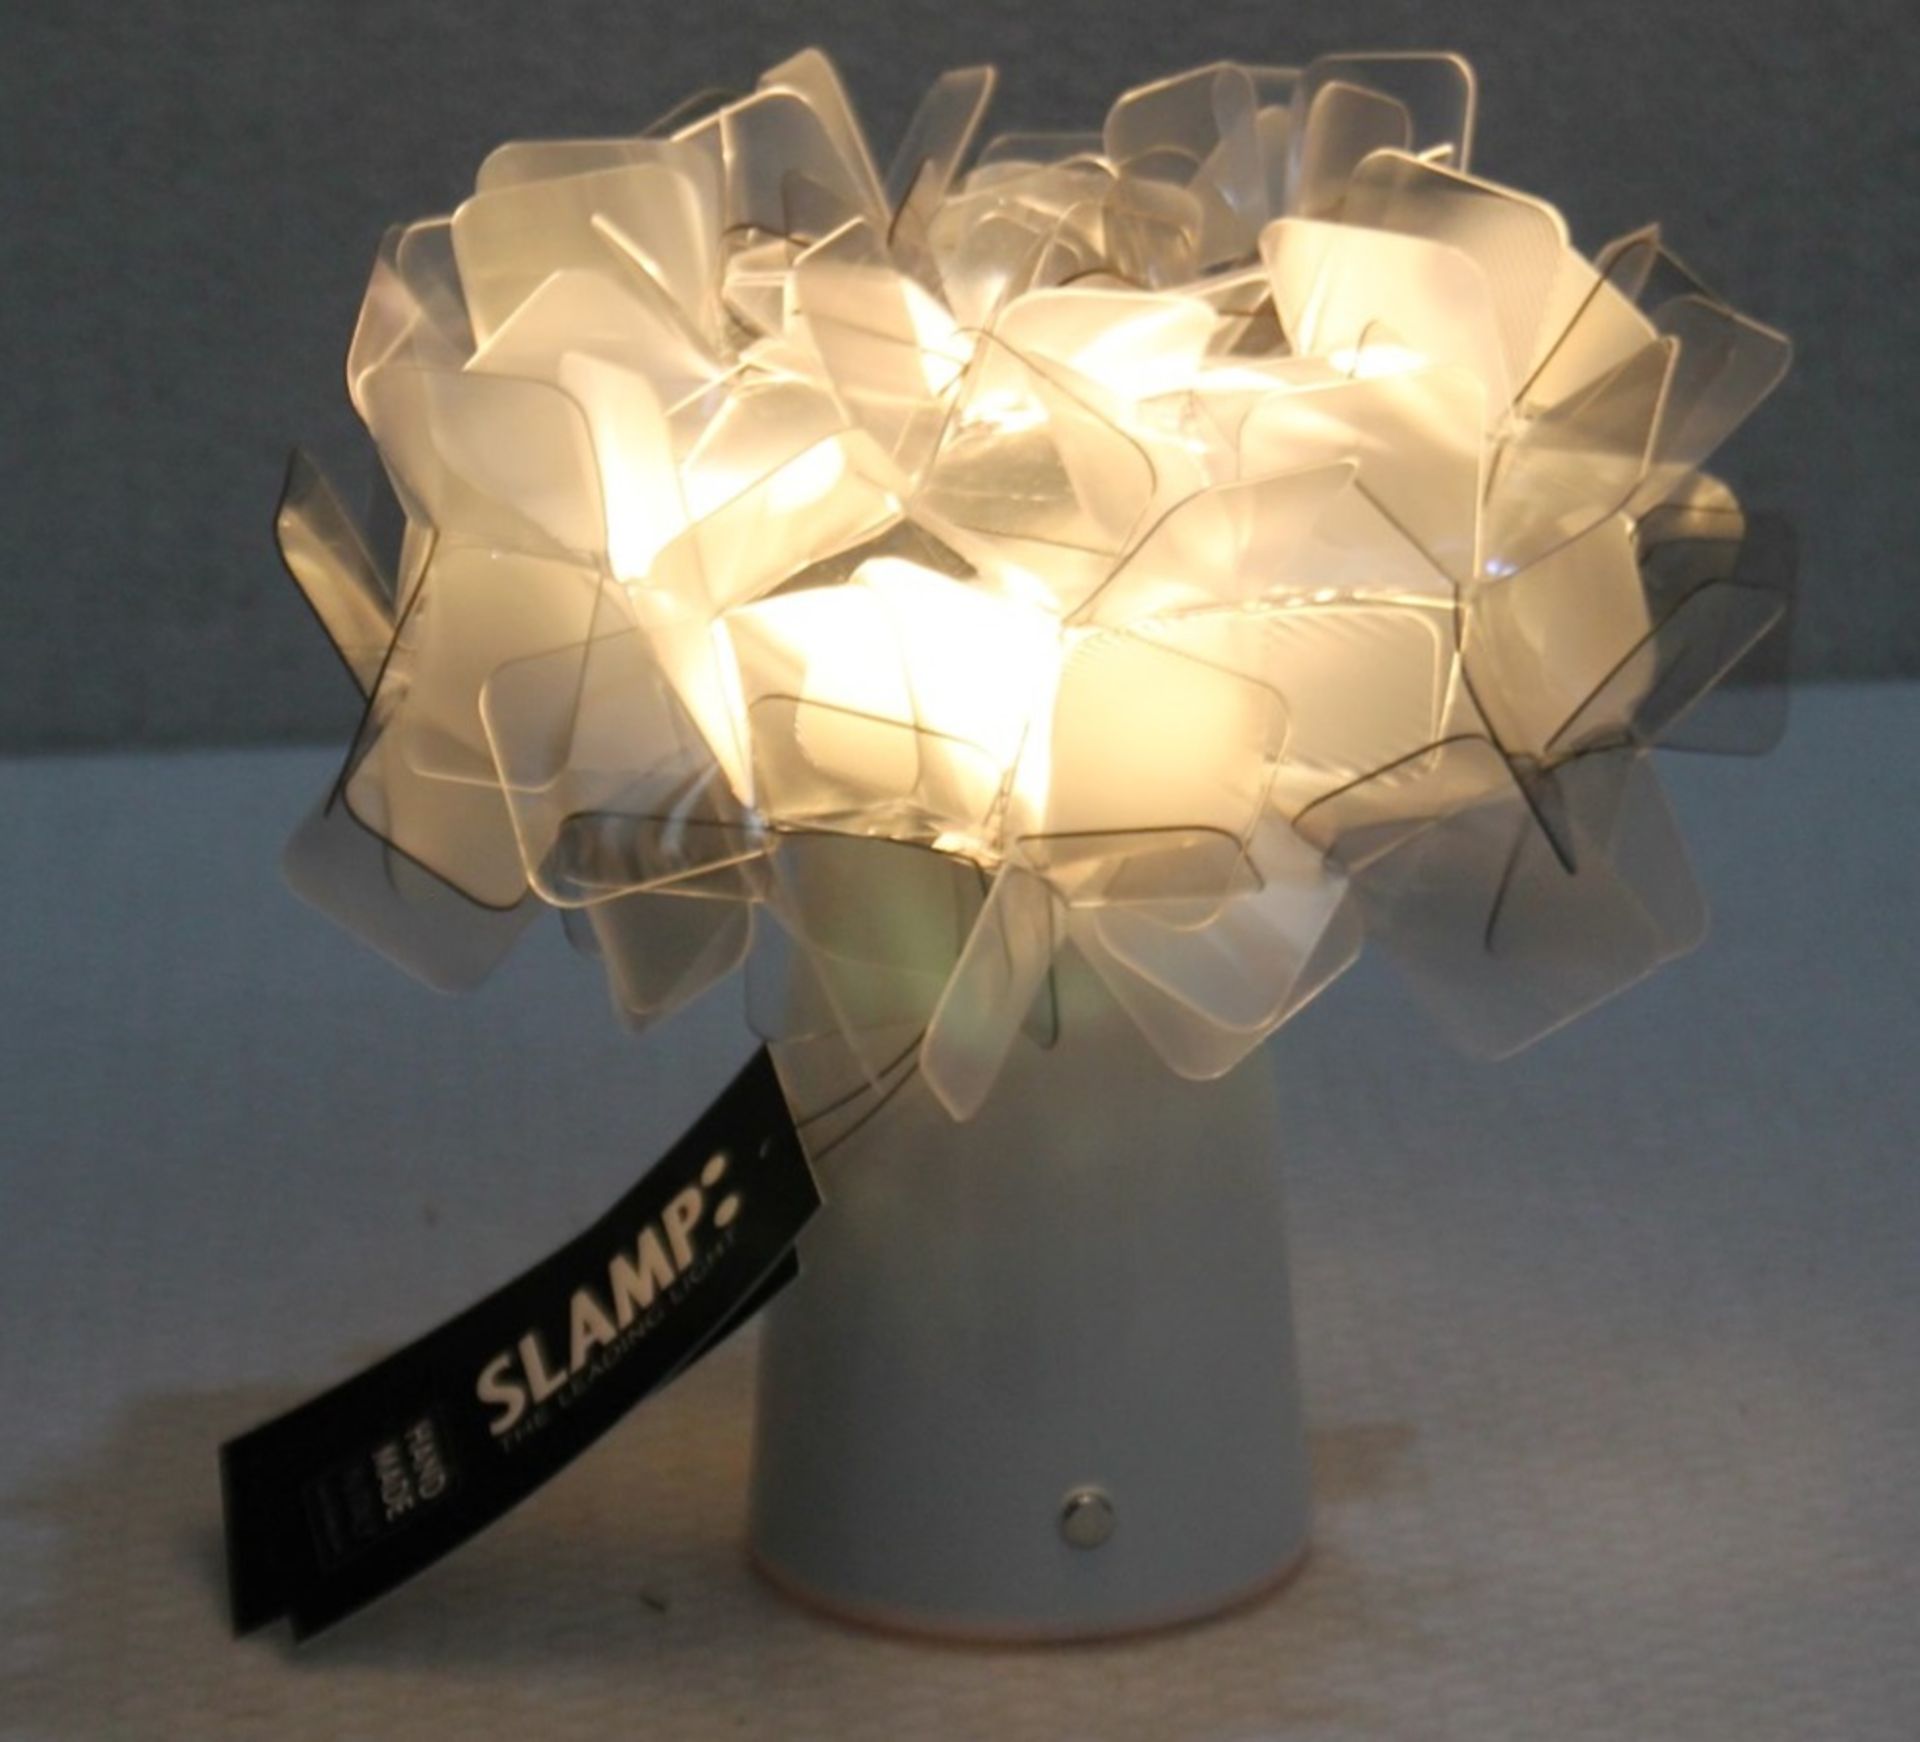 1 x SLAMP 'Clizia' Designer Table Lamp, With Touch Dimmer Function - Original Price £312.00 - Image 3 of 13